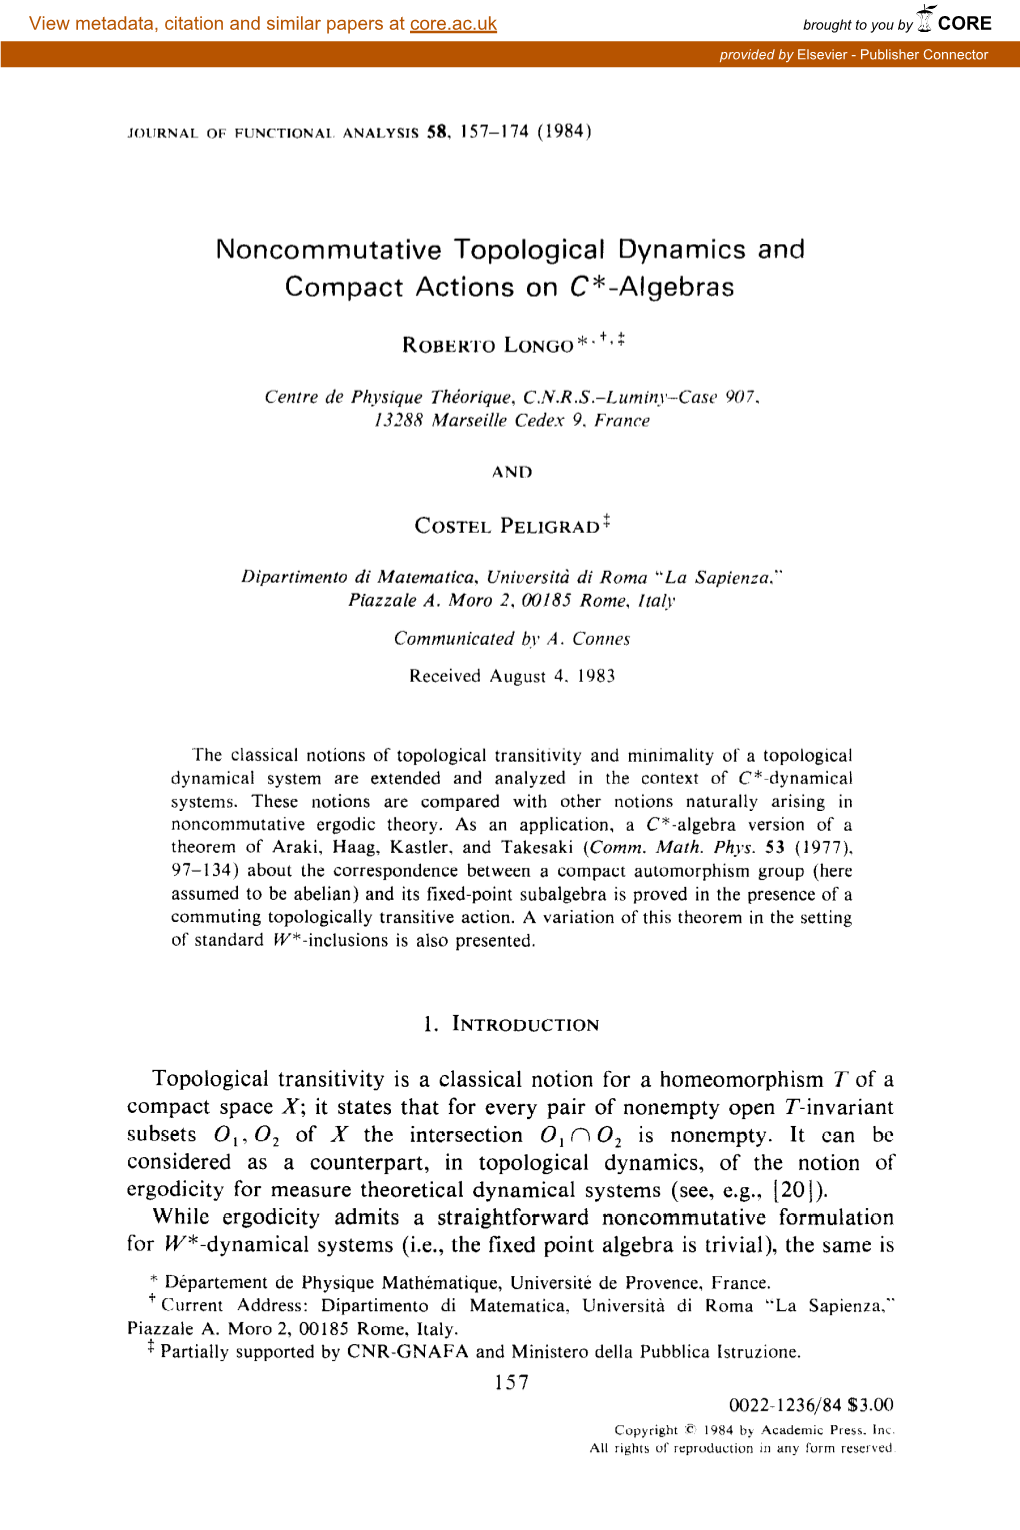 Noncommutative Topological Dynamics and Compact Actions on C*-Algebras